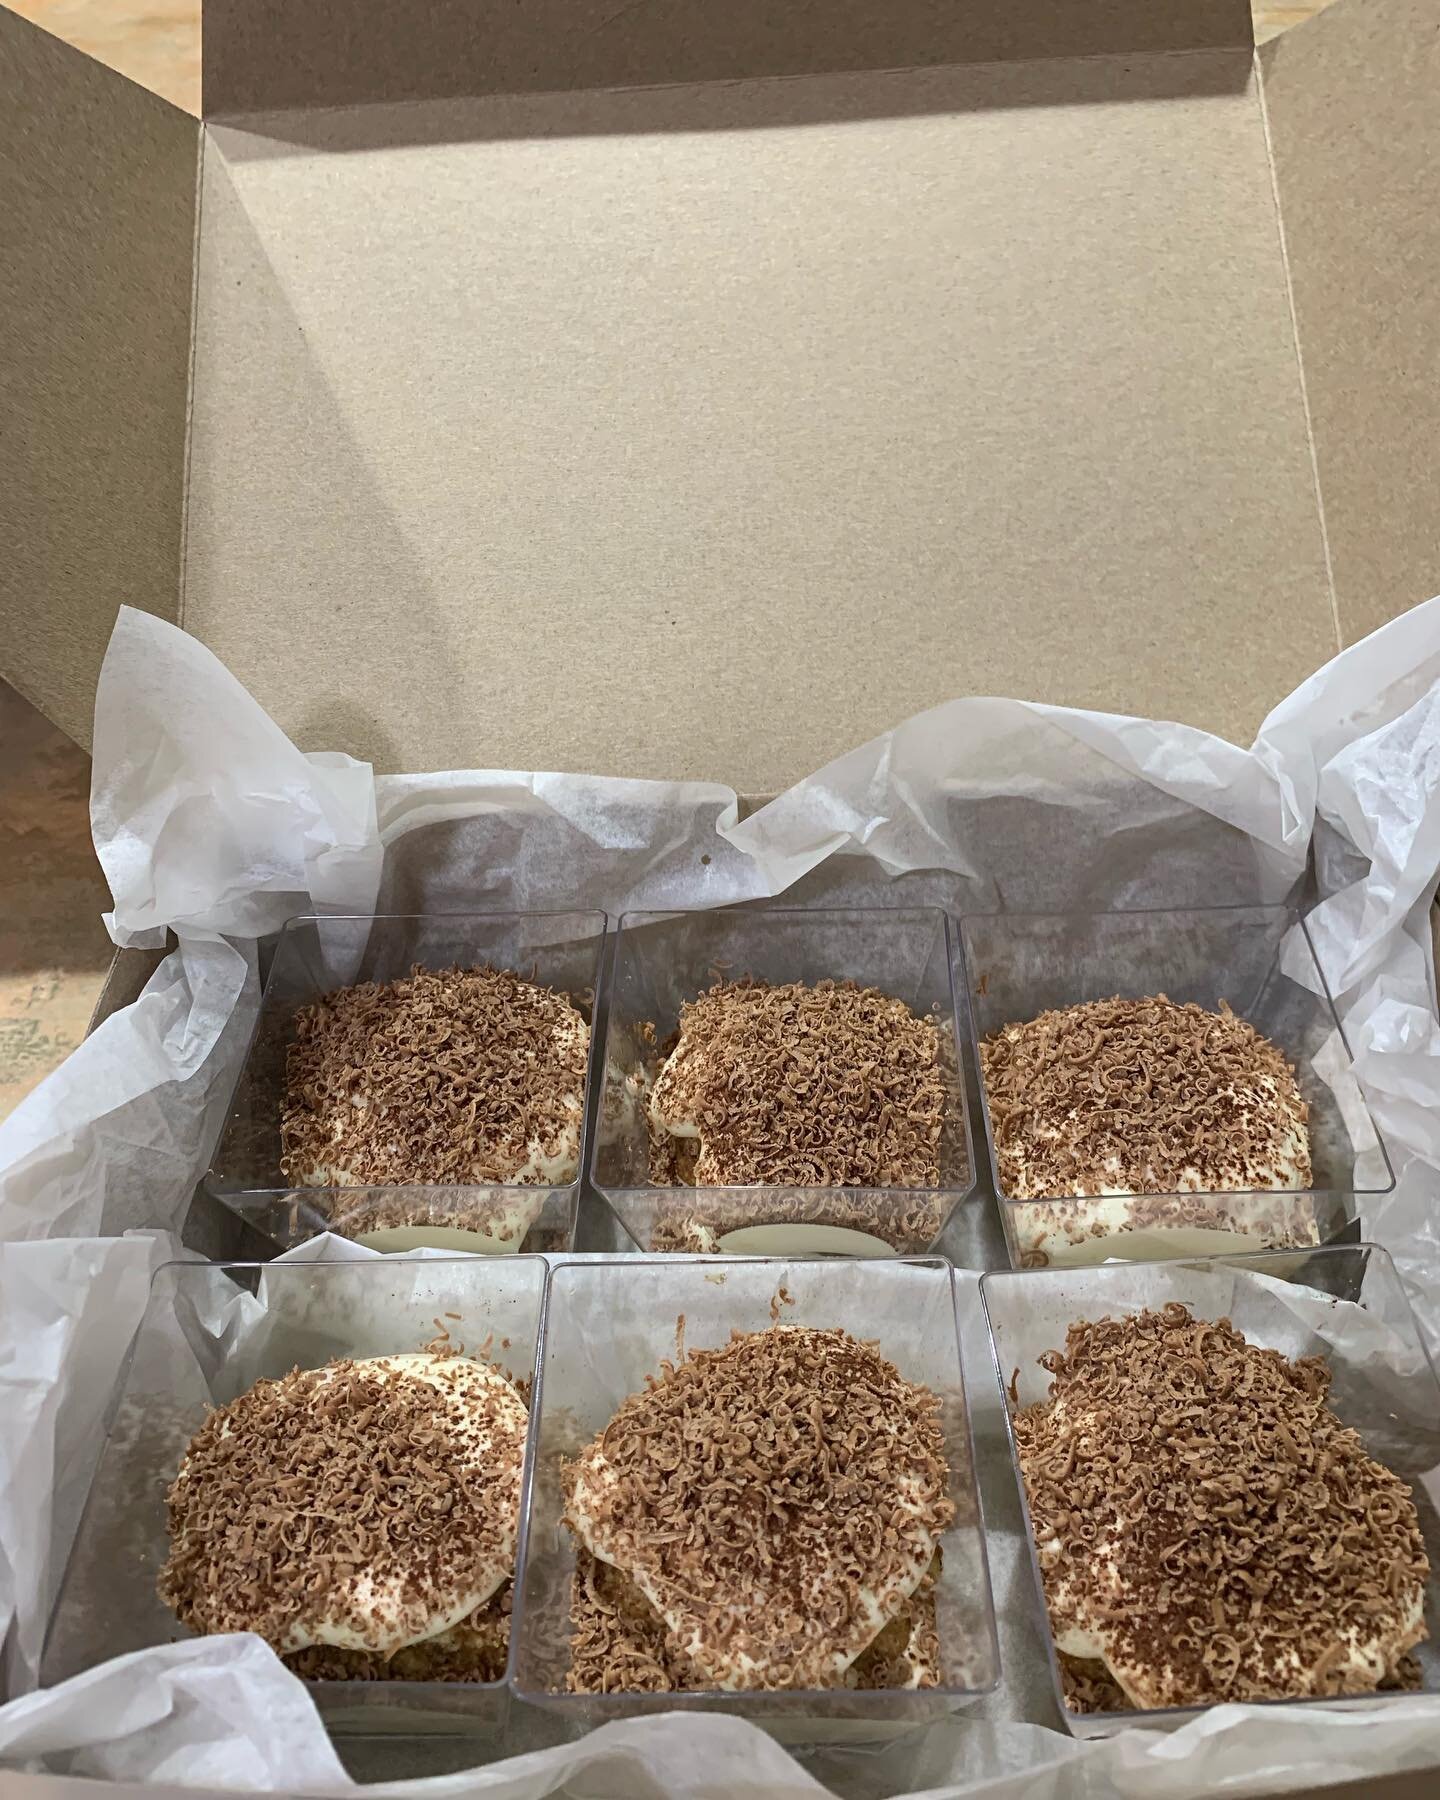 6 pack of mini Tiramisu &gt; 6 pack of beer ALL DAY/NIGHT LONG lol&hellip;Feel free to place an order for this week...Curbside pickups are Friday - Sunday 11am-7pm (If you need it between Mon-Thurs DM me and I&rsquo;ll accommodate you as best I can).